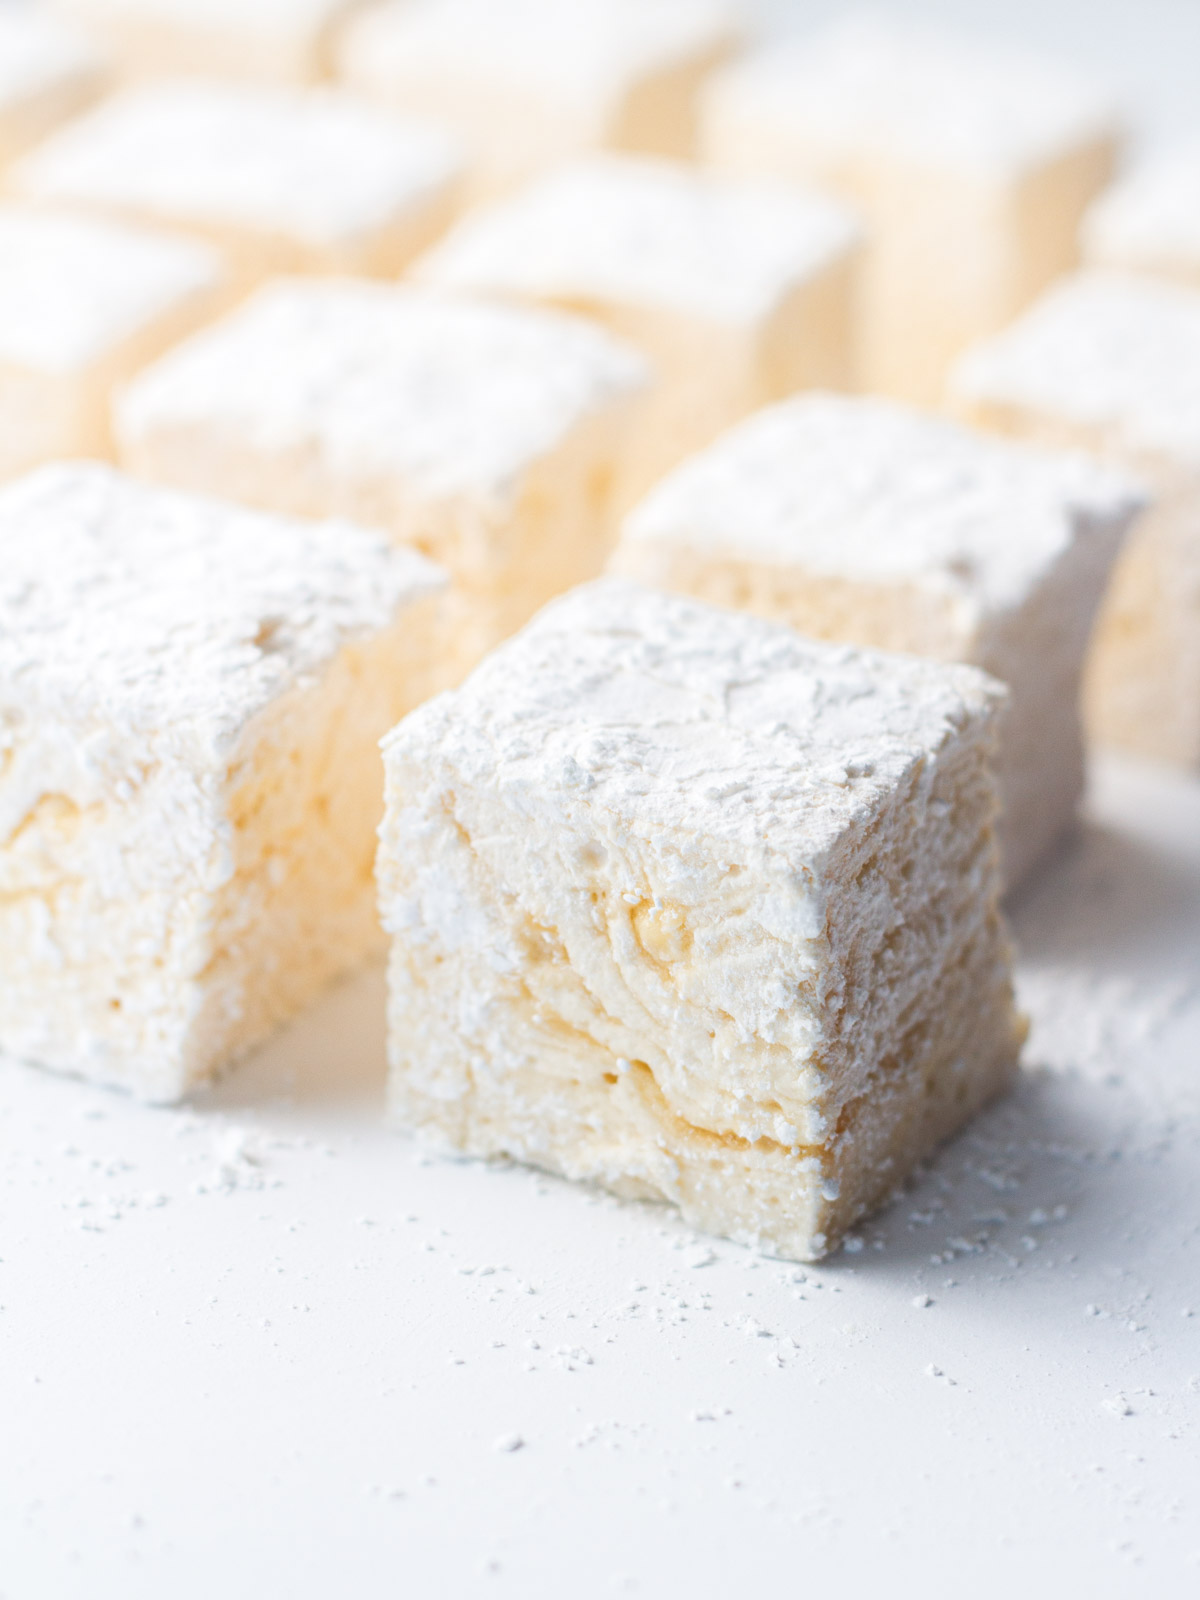 An angled view of caramel marshmallows lined up in rows.